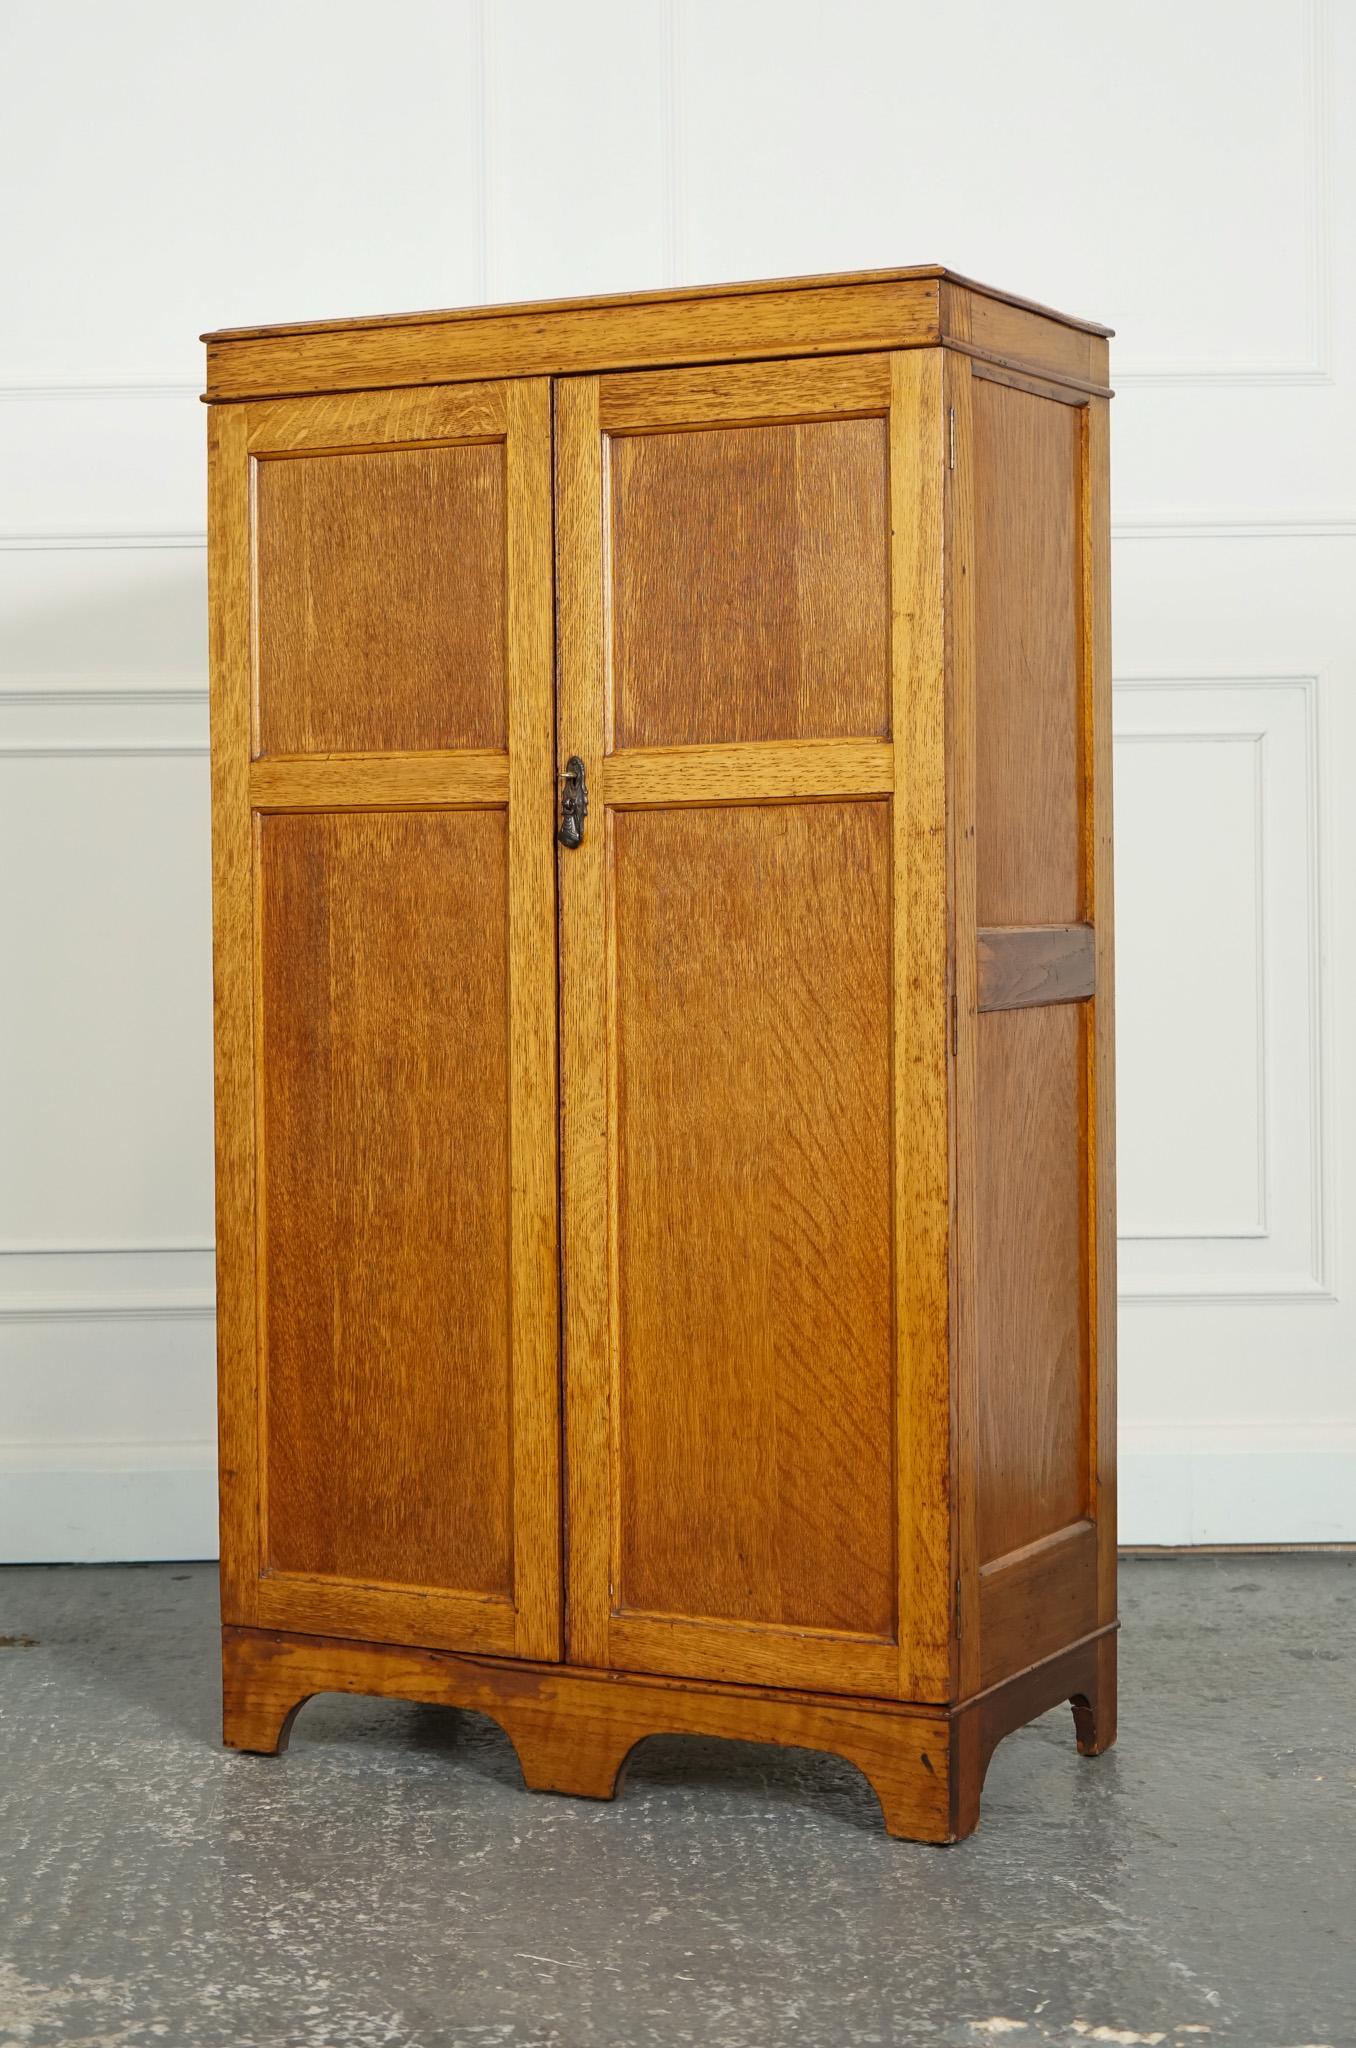 
We are delighted to offer for sale this vintage Petite Heals Cotswold Style Golden Oak Wardrobe.

The vintage petite Heal's Cotswold-style golden oak wardrobe is a charming and compact piece of furniture. It is made from high-quality oak with a